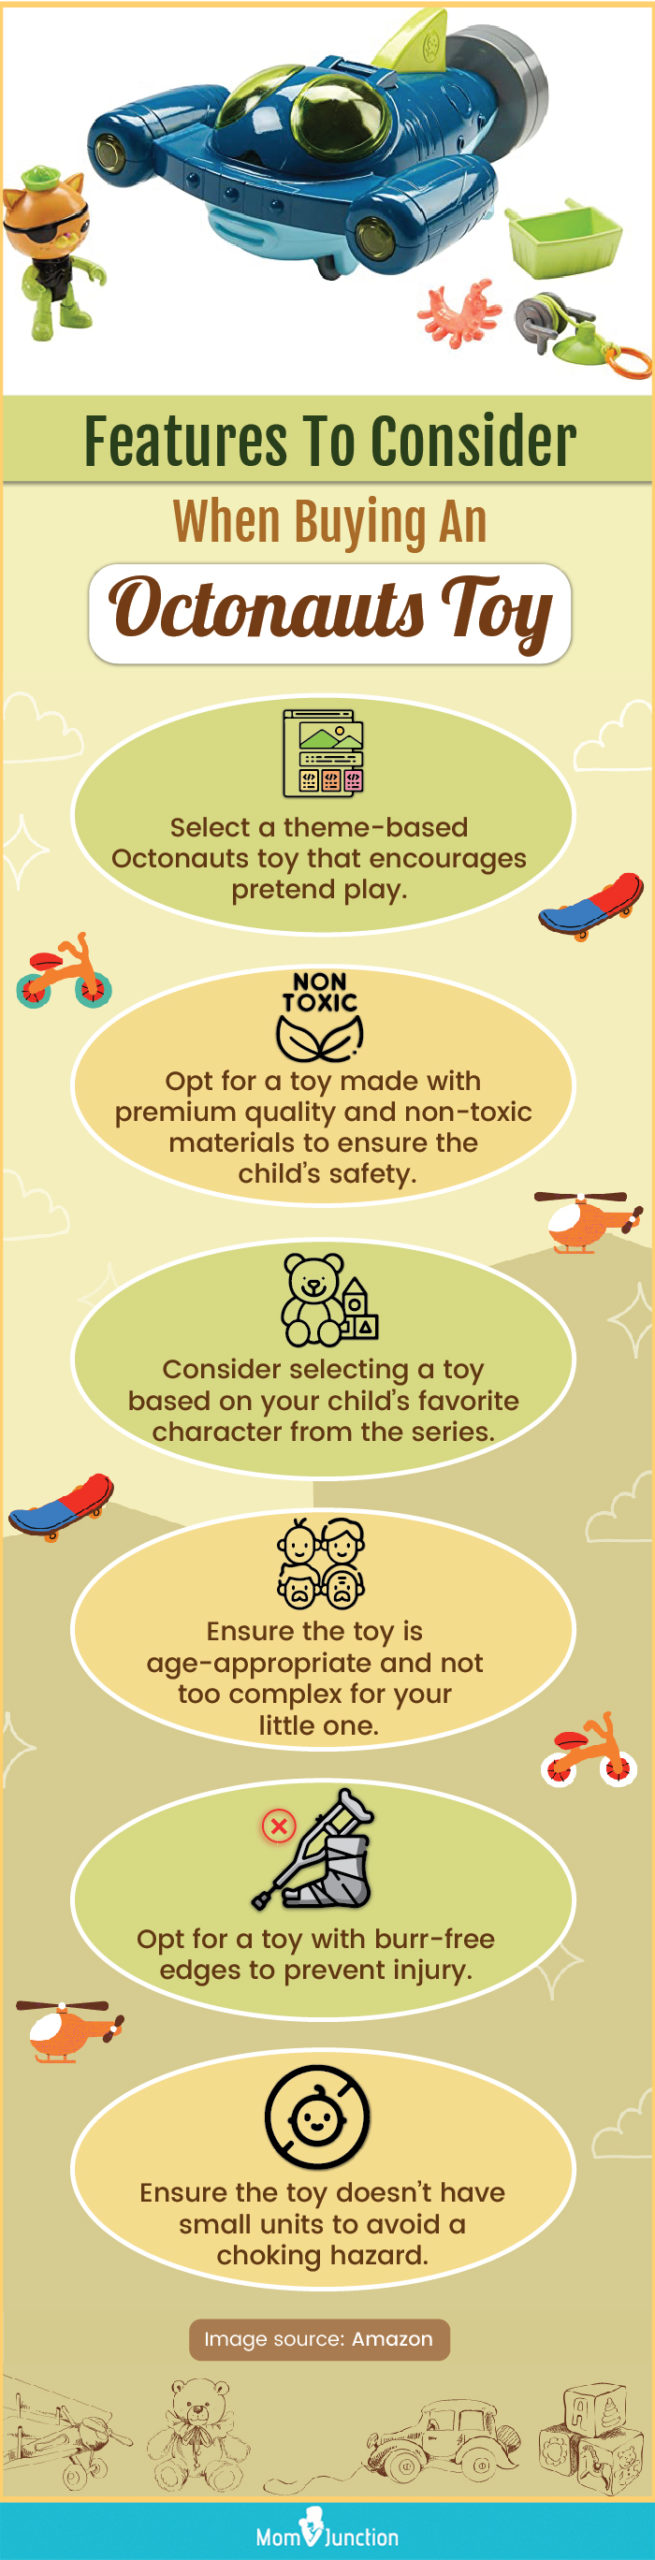 Features To Consider A Octonauts Toy